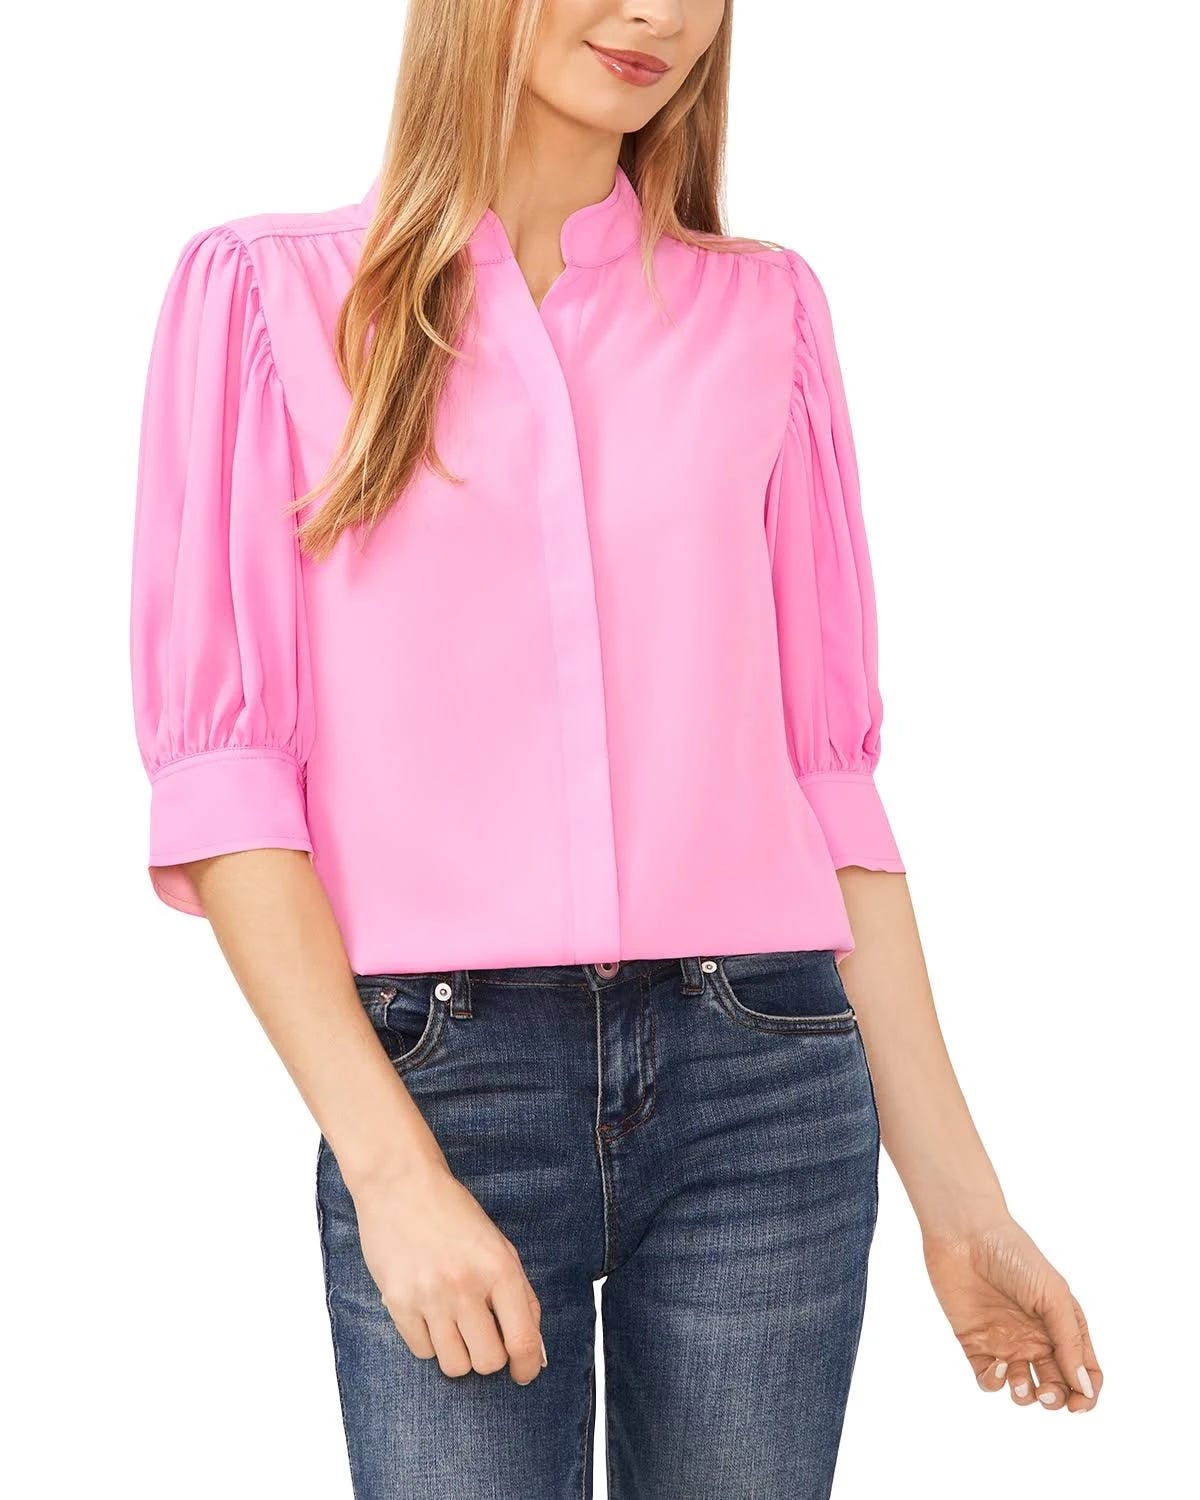 Elegant Pink Collared Button Down Blouse | Image